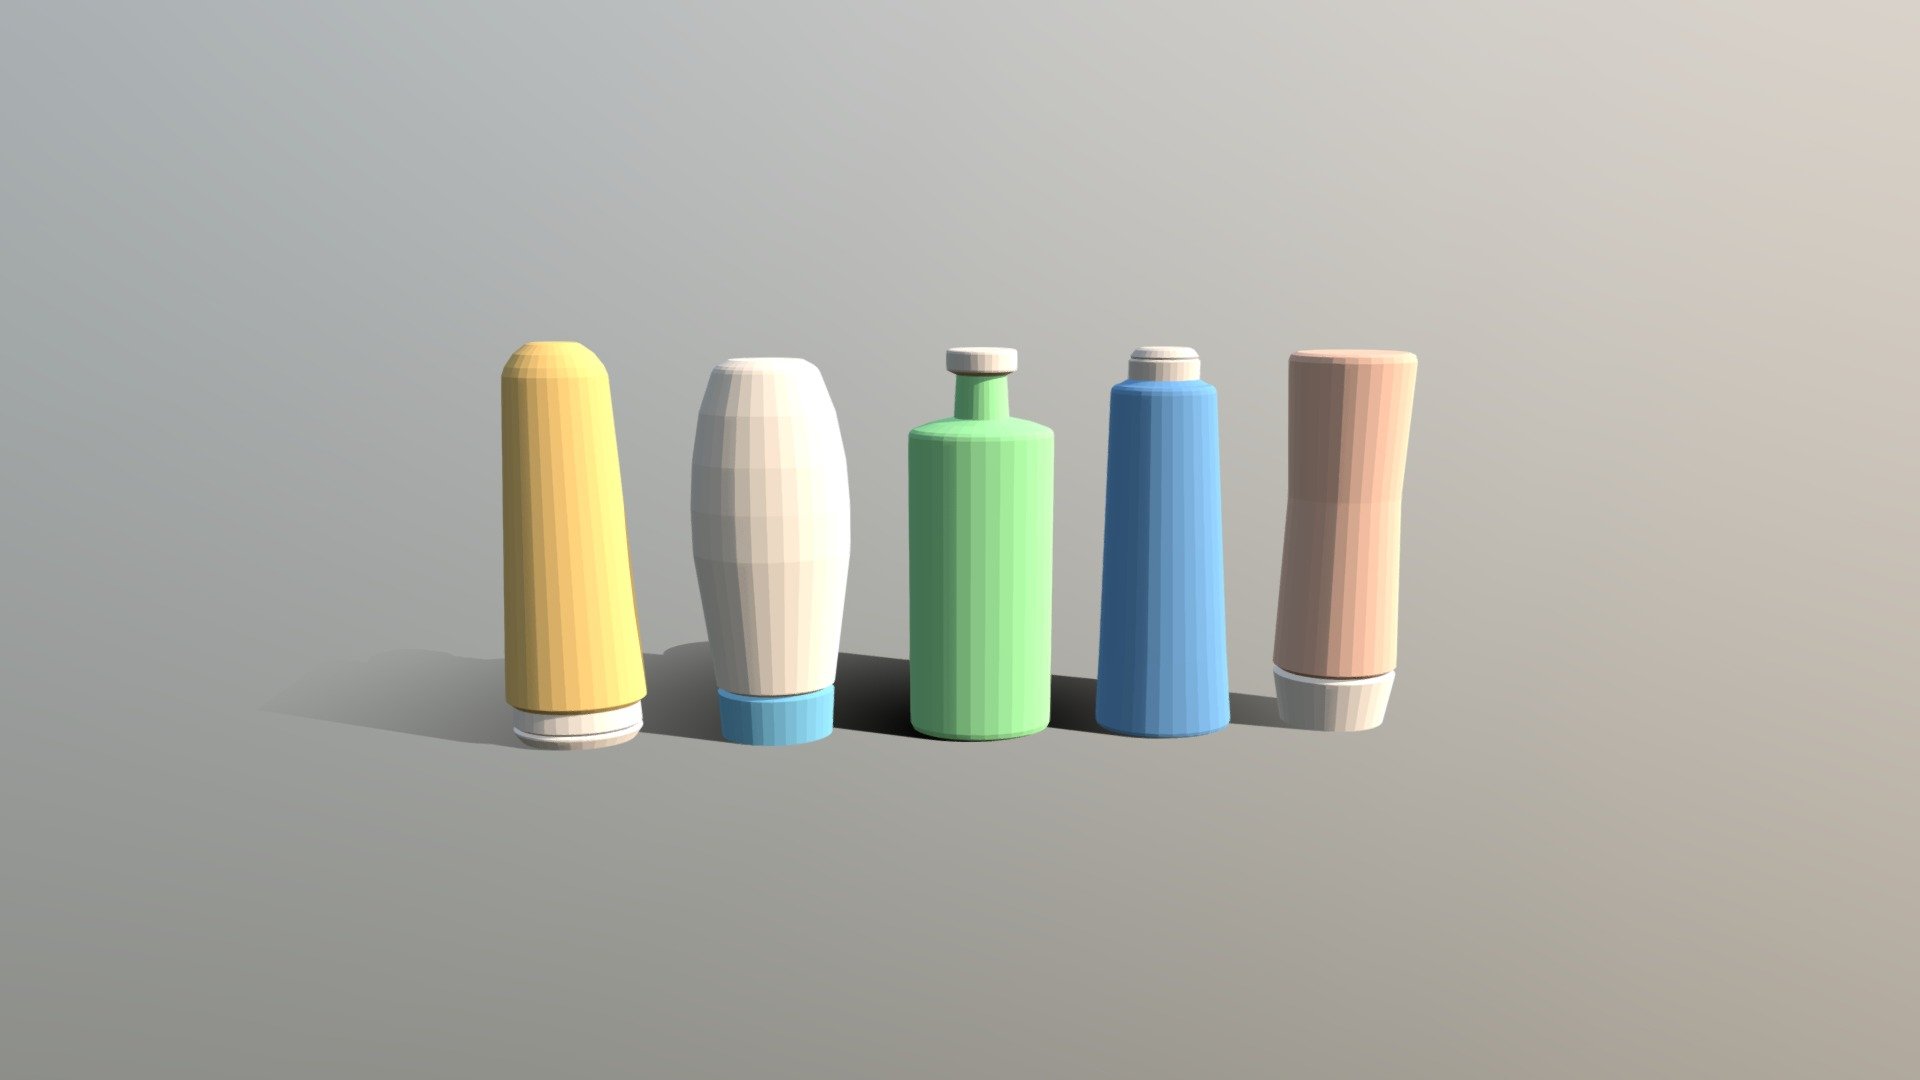 This is a 3d model of a 5 shampoo and shower gel bottles. The bottles was modeled and prepared for cartoon style renderings, background, general CG visualization etc presented as 5 meshes with quads only.

Verts : 2.730 Faces: 2.720

The 3d bottles have simple materials with diffuse colors.

No ring, maps and no UVW mapping is available.

The original file was created in blender. You will receive a 3DS, OBJ, FBX, blend, DAE, Stl.

All preview images were rendered with Blender Cycles. Product is ready to render out-of-the-box. Please note that the lights, cameras, and background is only included in the .blend file. The model is clean and alone in the other provided files, centred at origin and has real-world scale 3d model